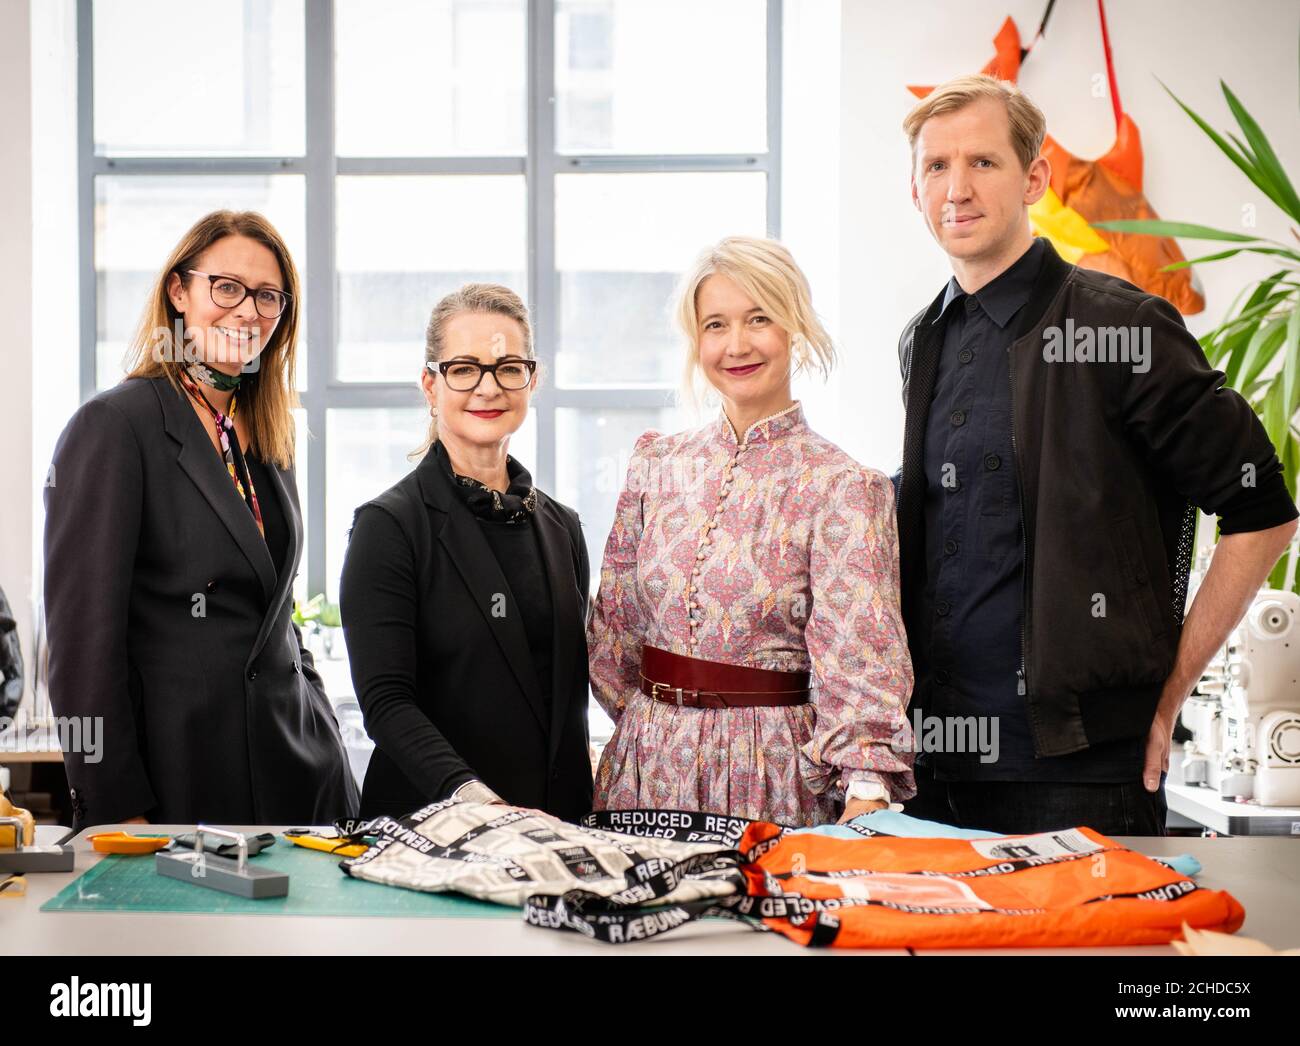 EDITORIAL USE ONLY (Left to right) Caroline Rush CBE, Chief Executive of the British Fashion Council, Professor Frances Corner OBE, Head of London College of Fashion, UAL, Justine Simons OBE, Deputy Mayor for Culture and the Creative Industries, designer Christopher Raeburn, at the launch of the Fashion District, which is a new hub for fashion innovation that aims to return world-leading fashion manufacturing and design to the east end, held at Christopher's studio in London. Stock Photo